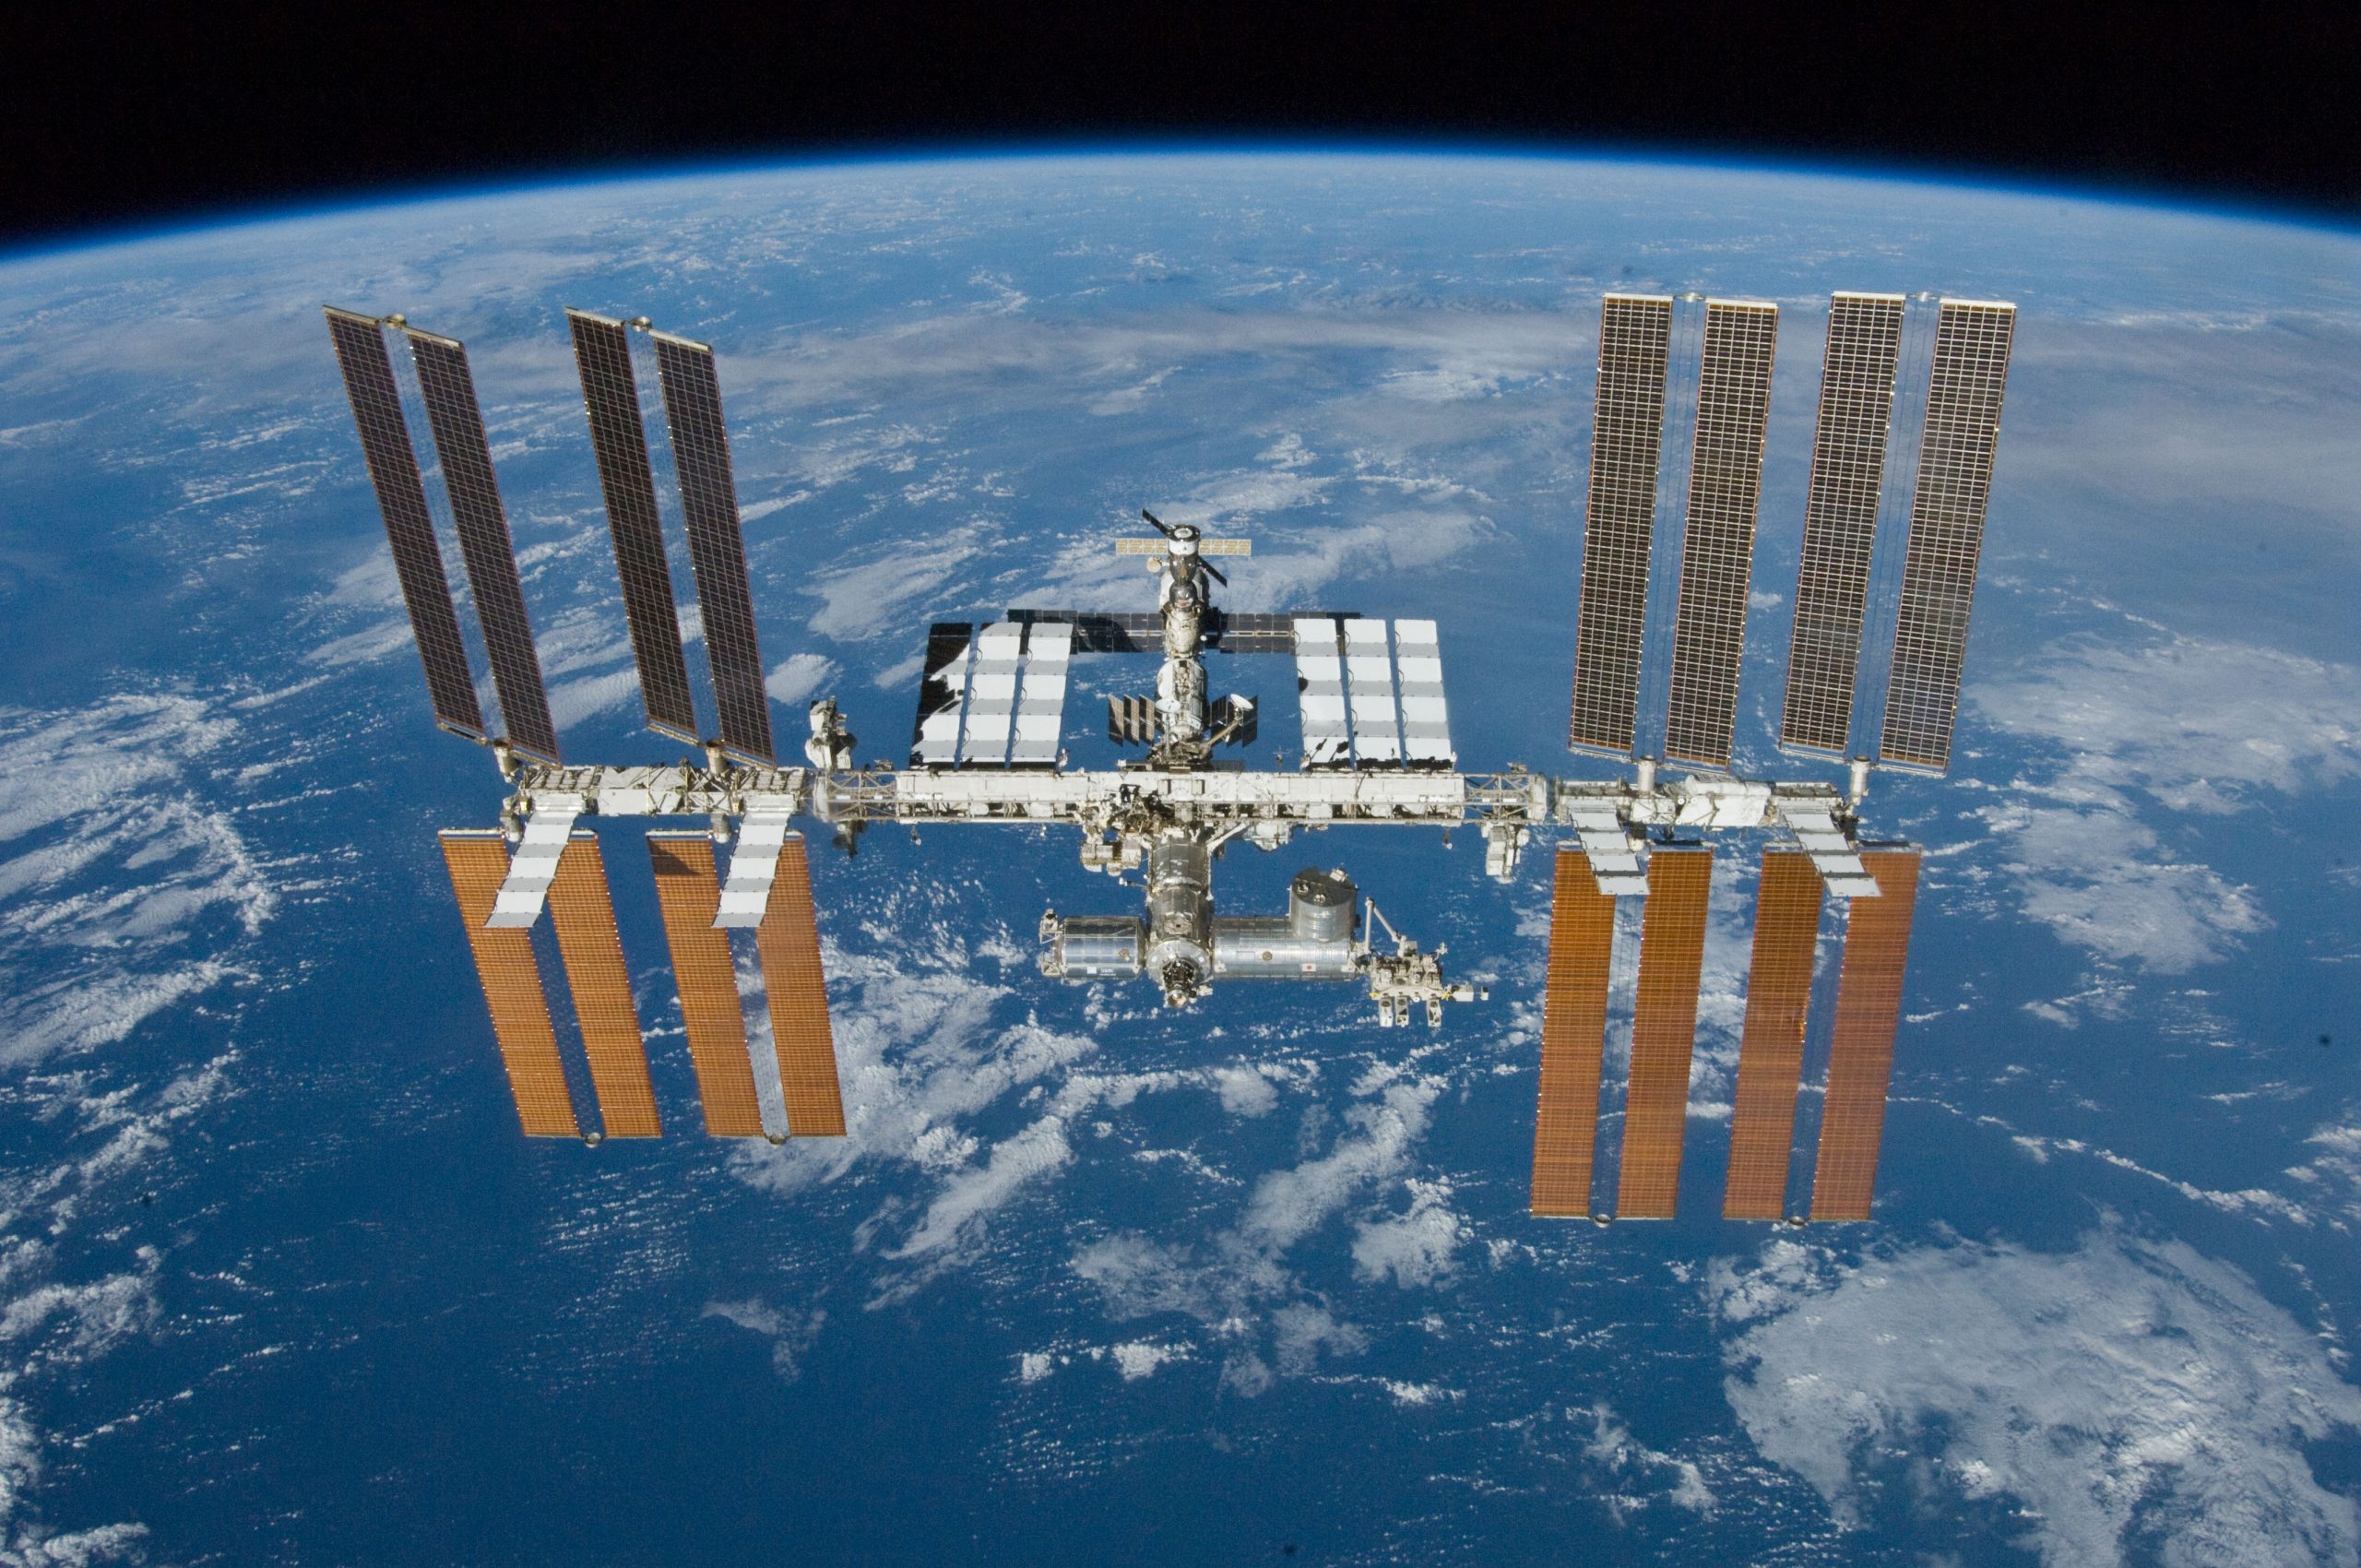 Space Explorers: The ISS Experience